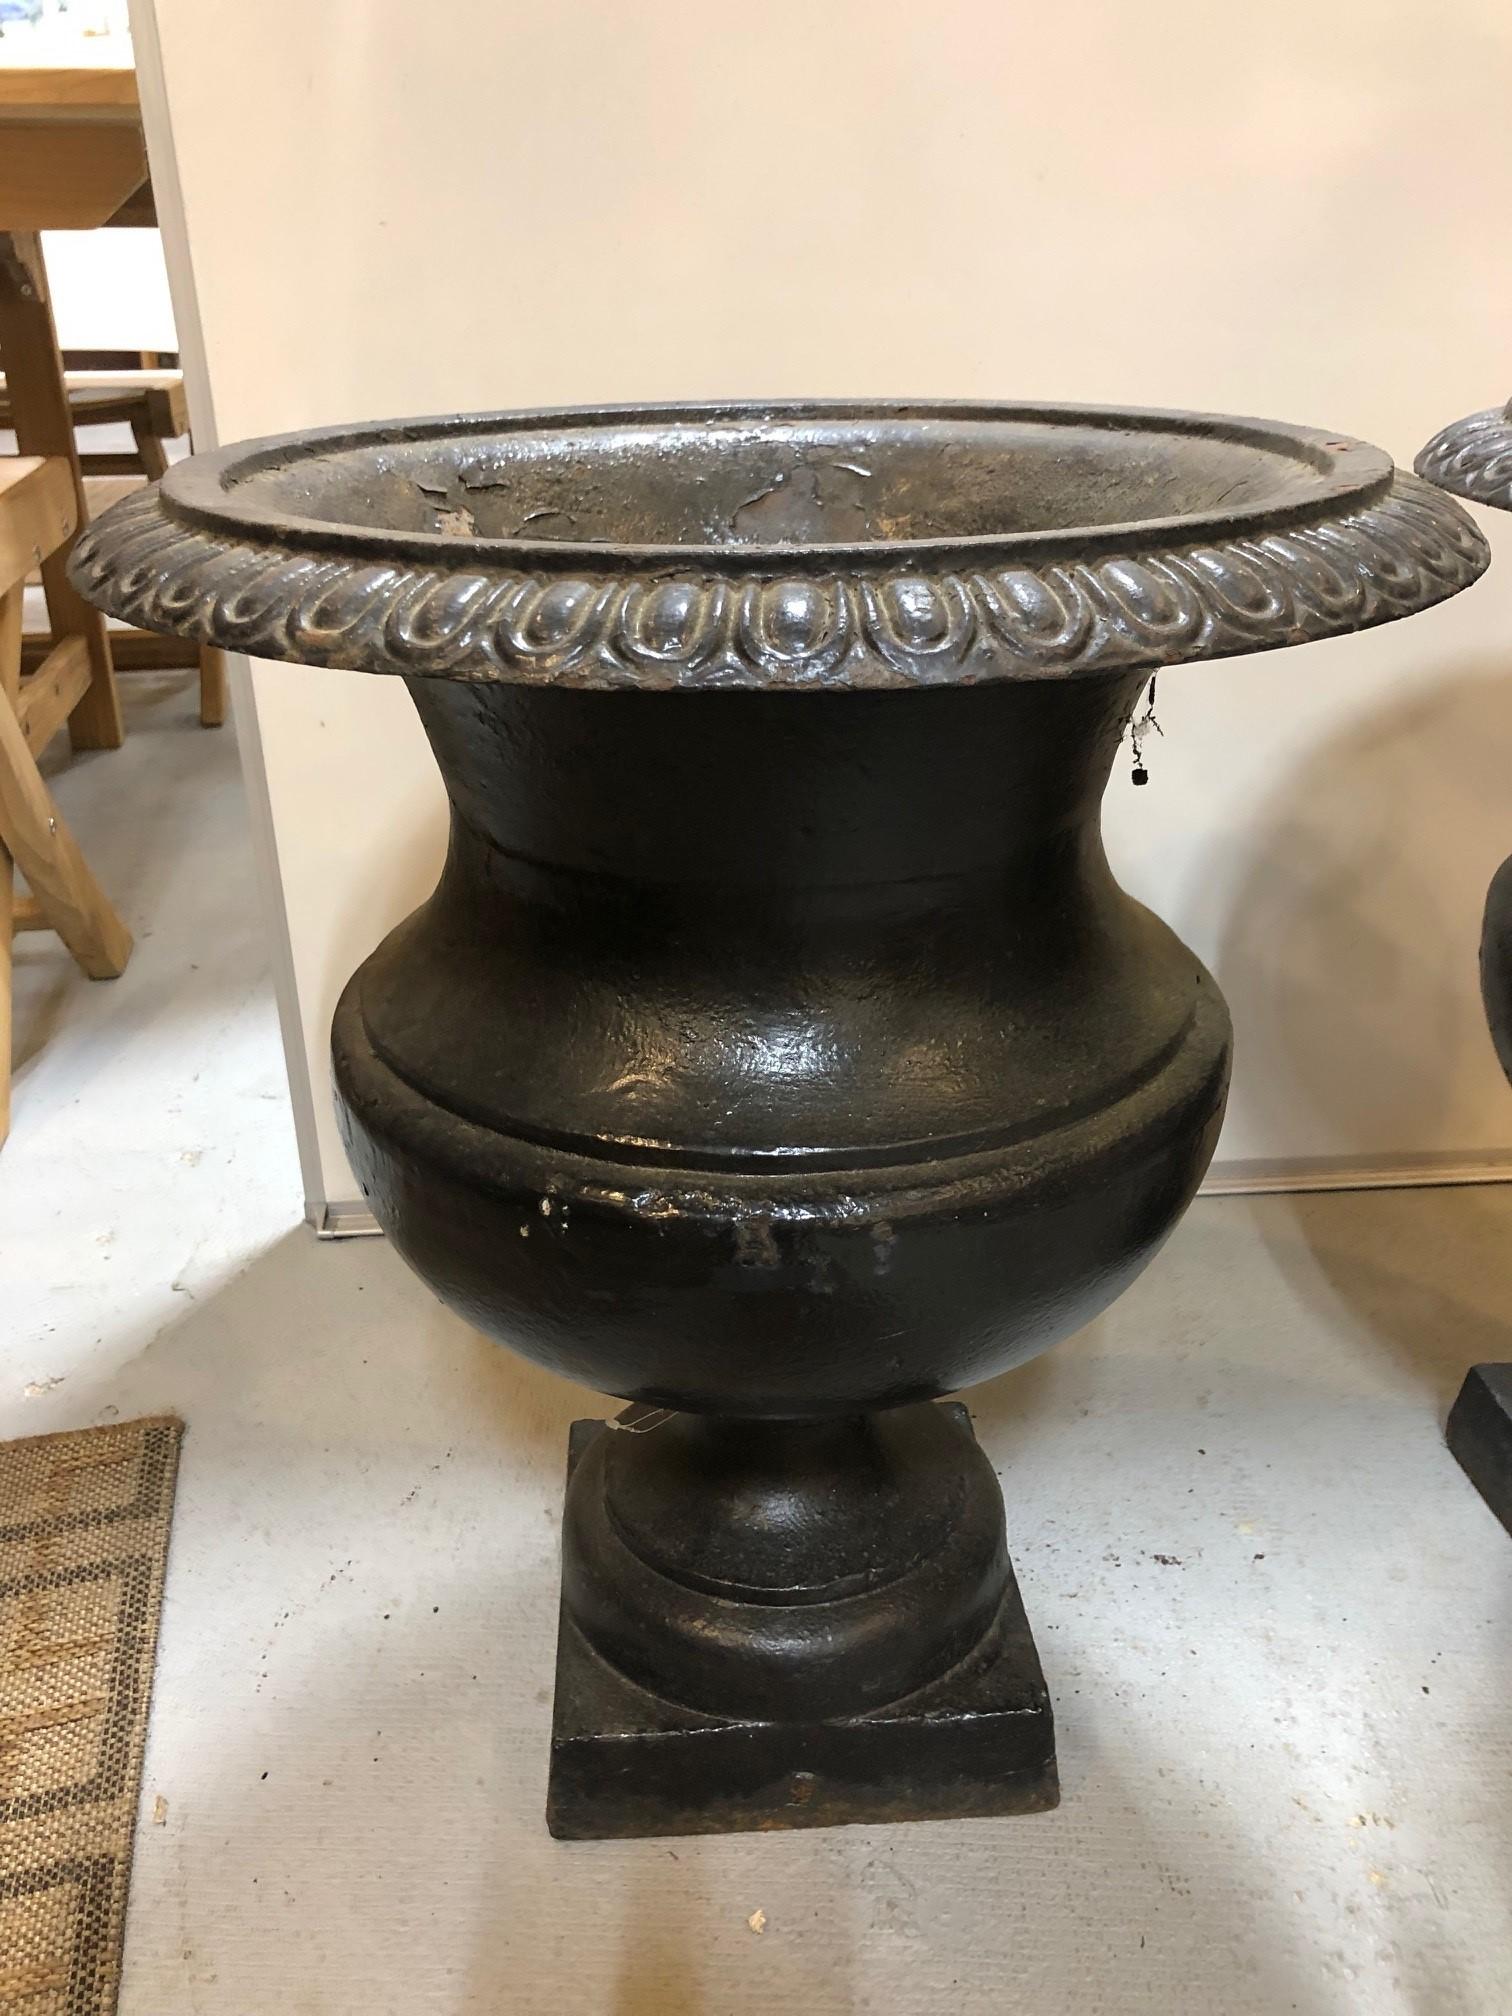 Vintage pair of Iron Garden Urns with a square pedestal base. This pair would look fantastic on either side of a doorway or in a garden .The urns are in very good condition with some loss of finish and areas of rust. Measures: Height 22